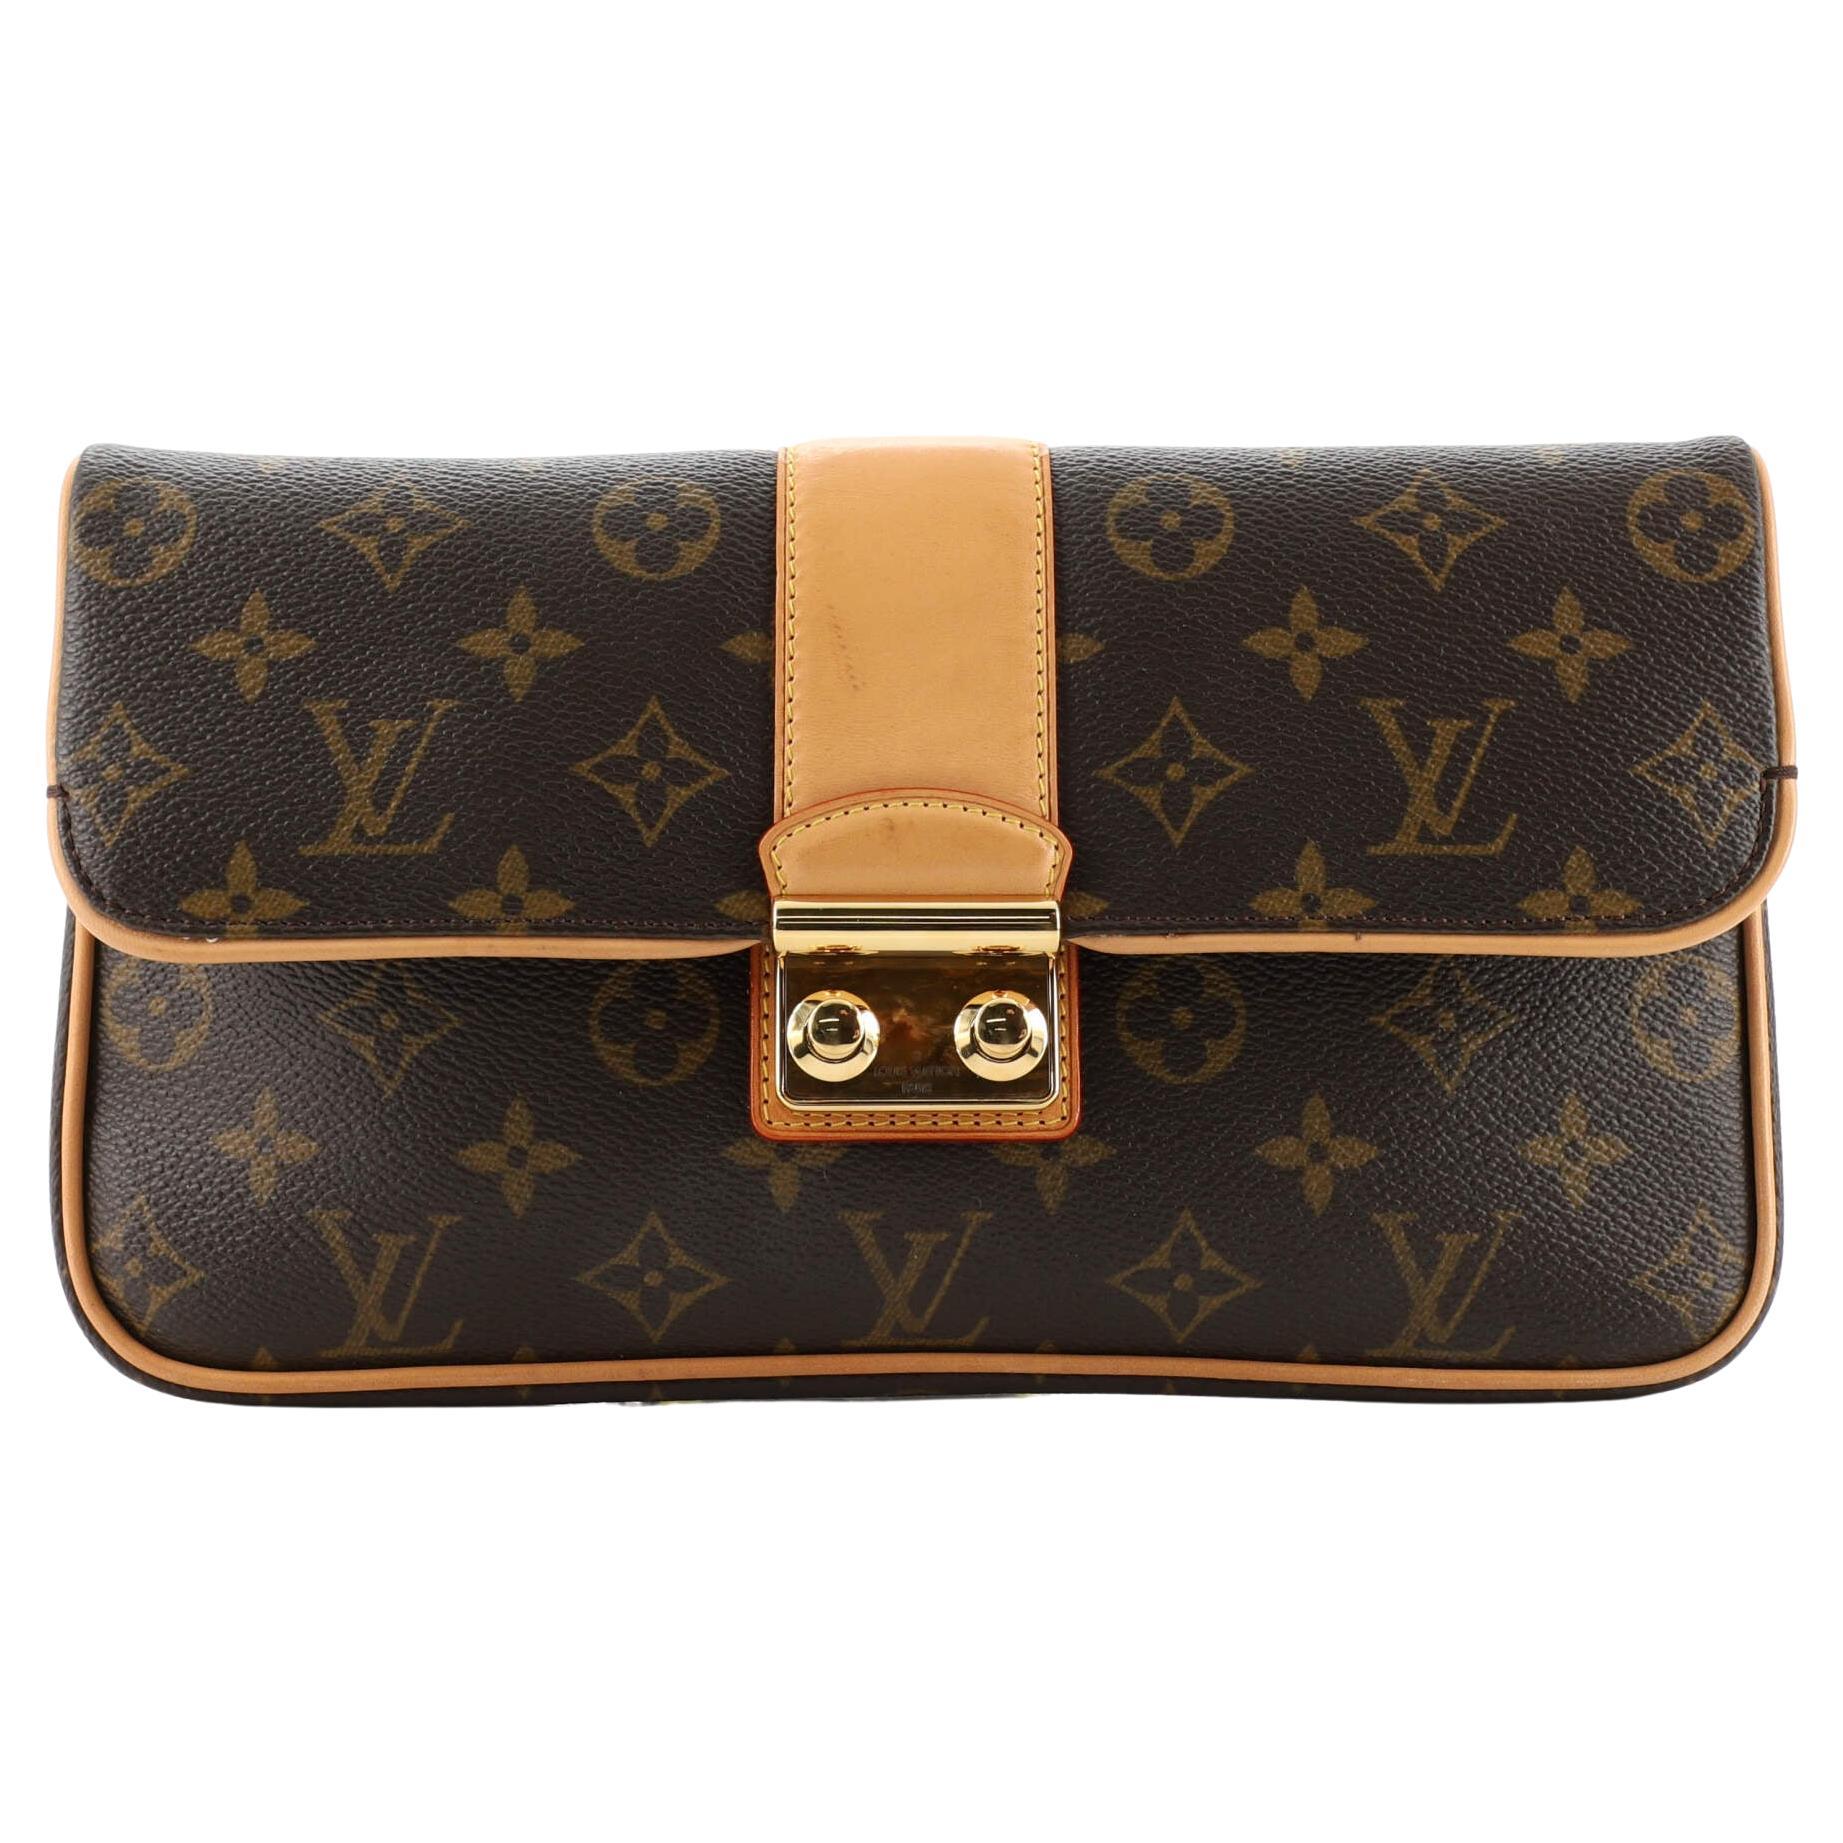 Sofia coppola leather clutch bag Louis Vuitton Brown in Leather